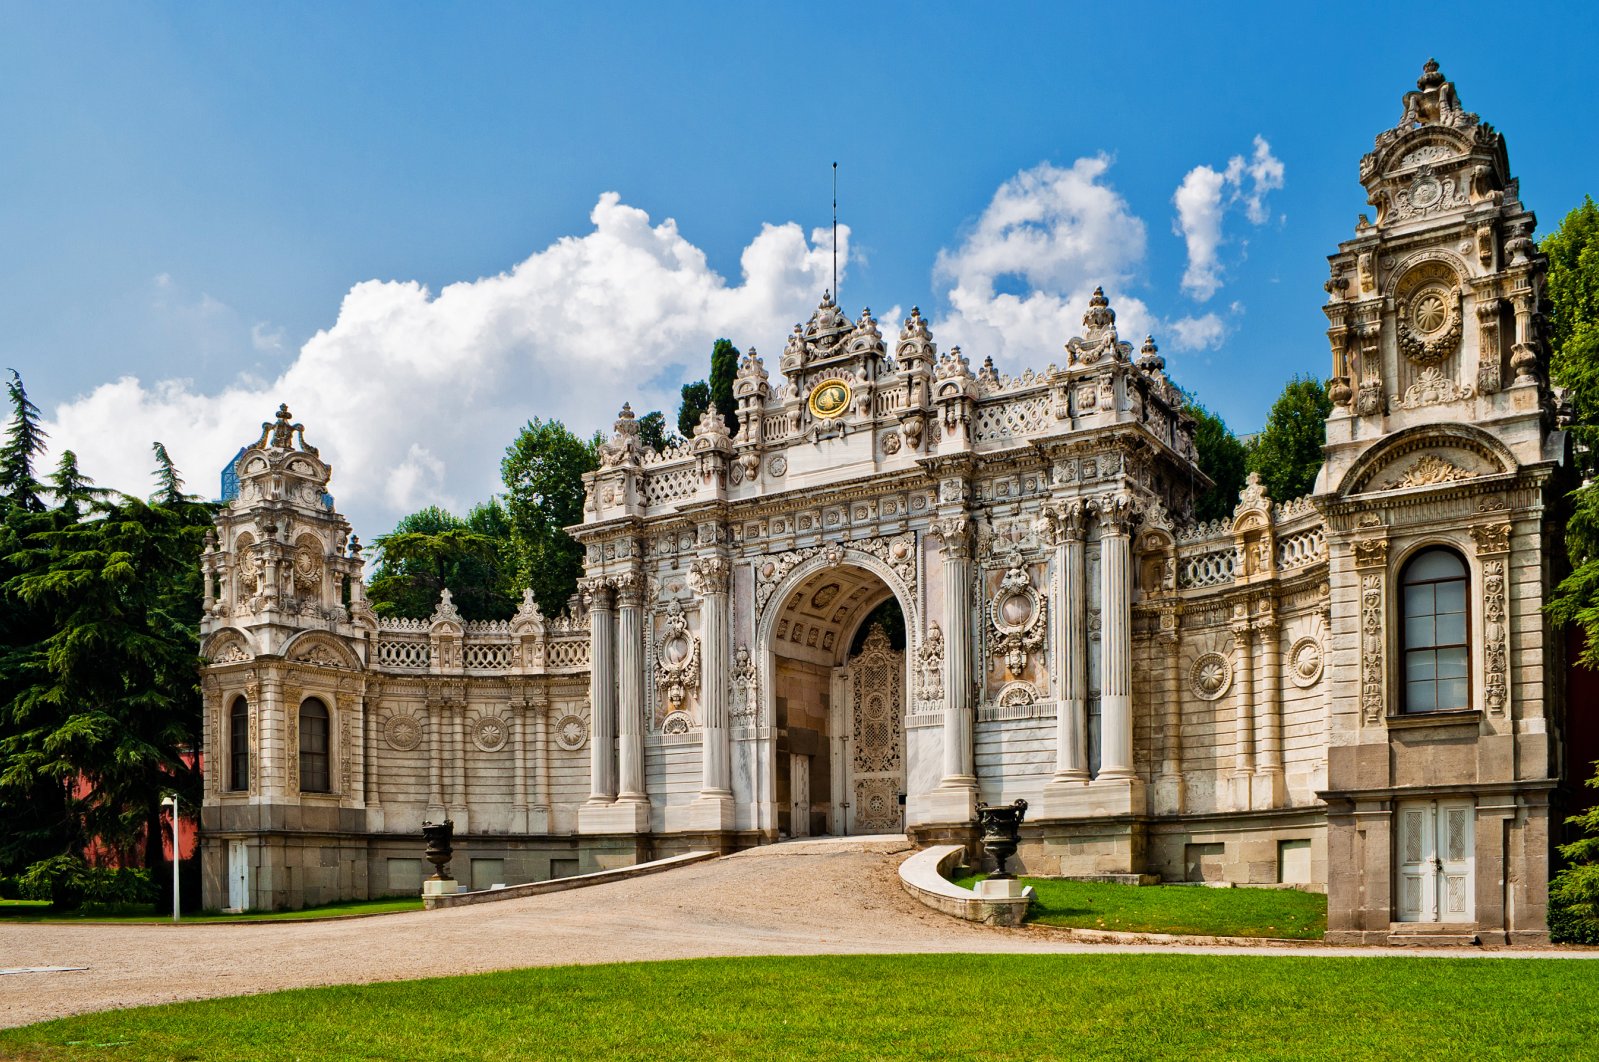 Built between 1843 and 1856 on the European coast of the Bosporus, Dolmabahçe Palace has been a touristic favorite for years. (iStock Photo)